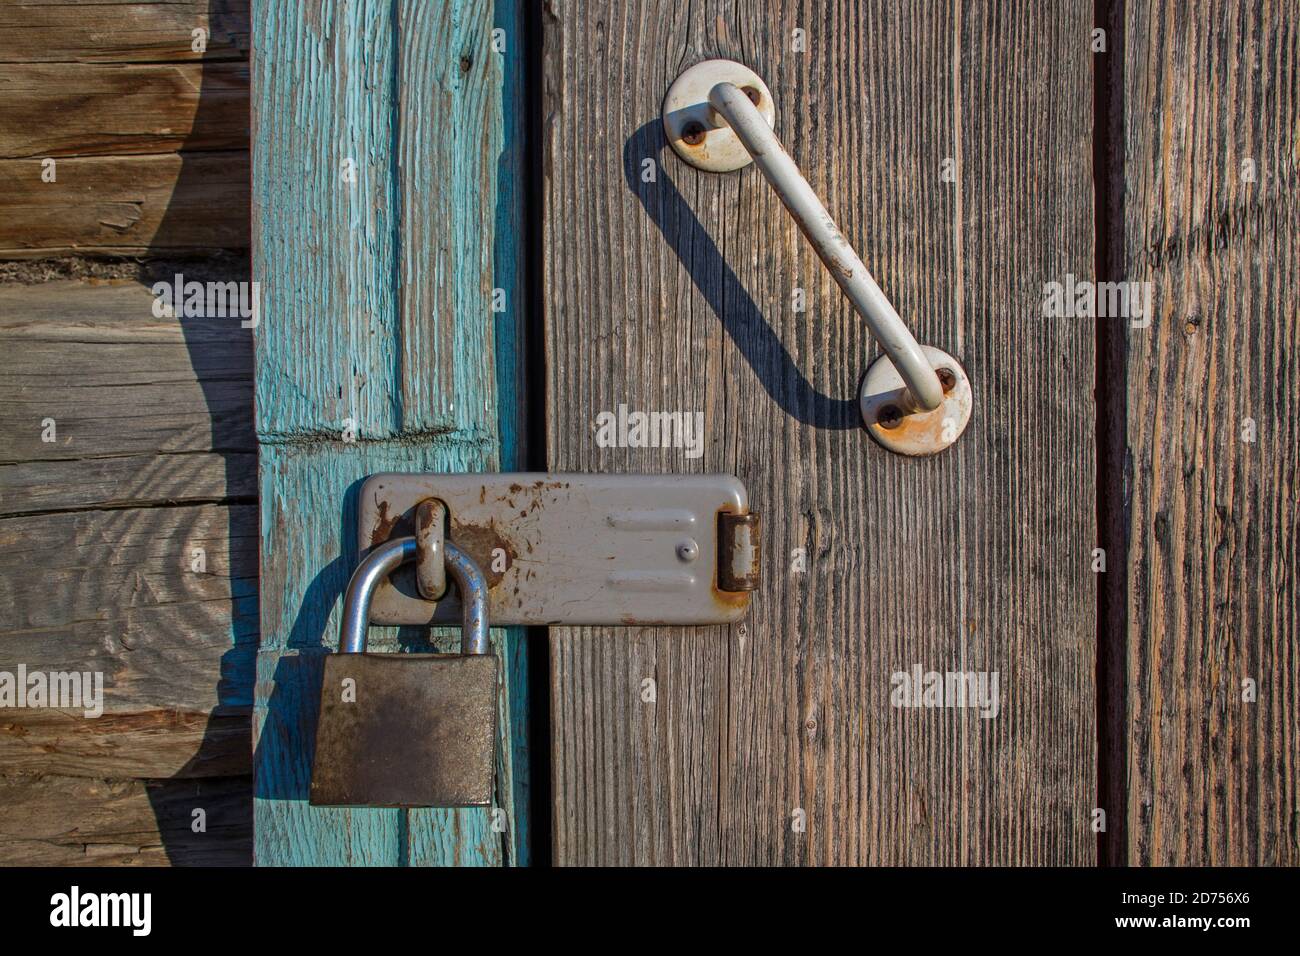 Old metal rusty lock on wooden door with white-painted, battered handle bolted on screws locked through bracket to door frame on bolt of log structure Stock Photo